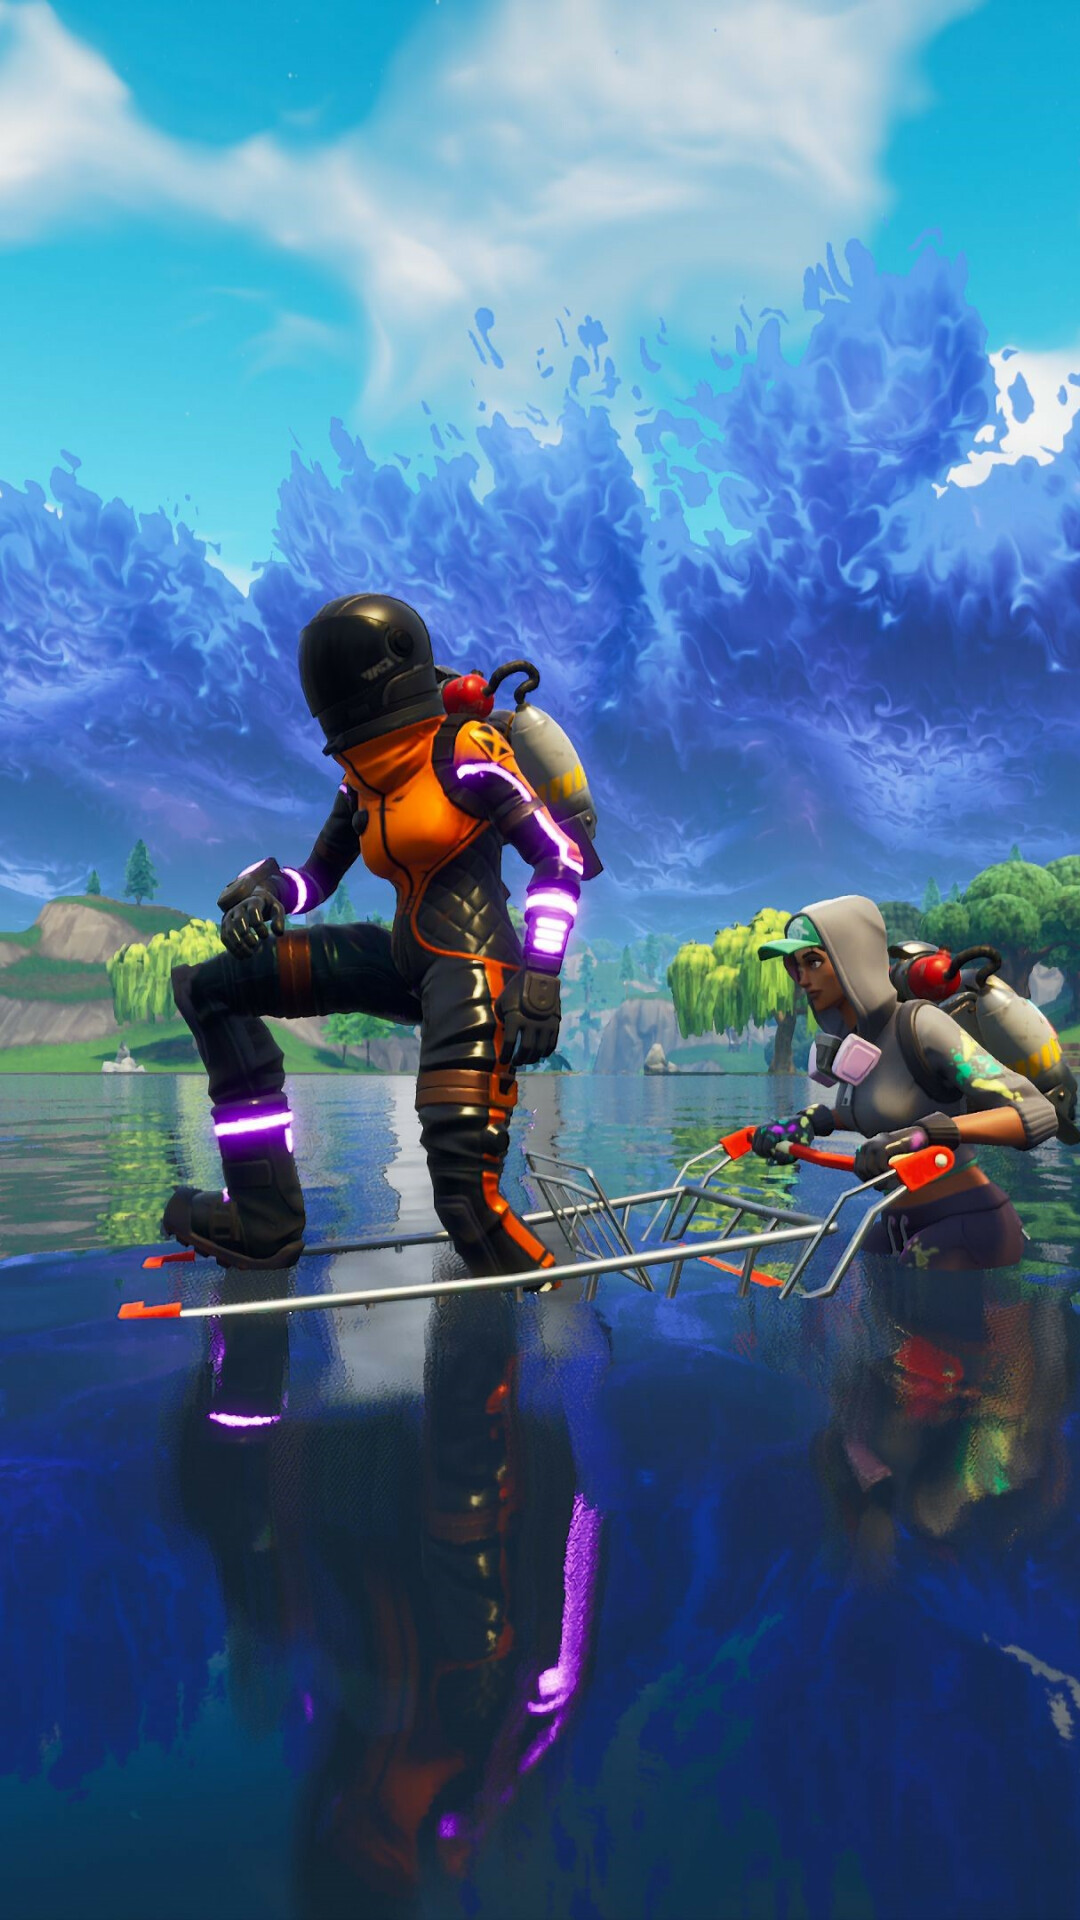 Fortnite: The online multiplayer Battle Royale mode, Almost exclusively played by youngsters. 1080x1920 Full HD Wallpaper.